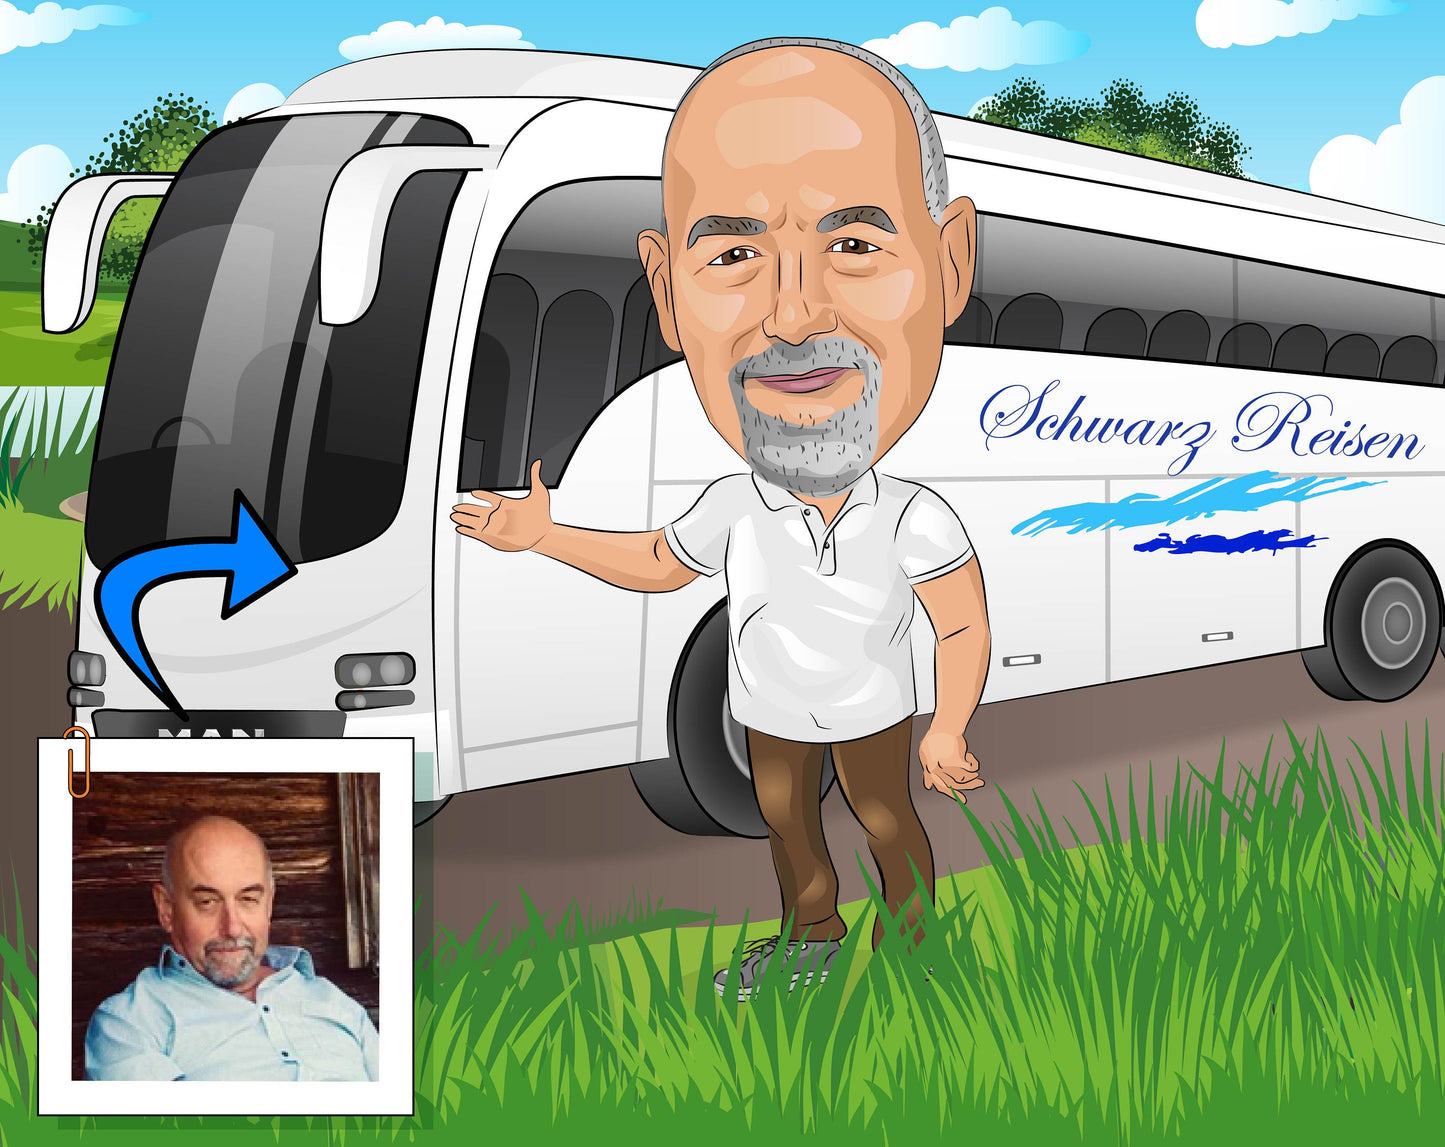 Locksmith Gift - Custom Caricature Portrait From Your Photo